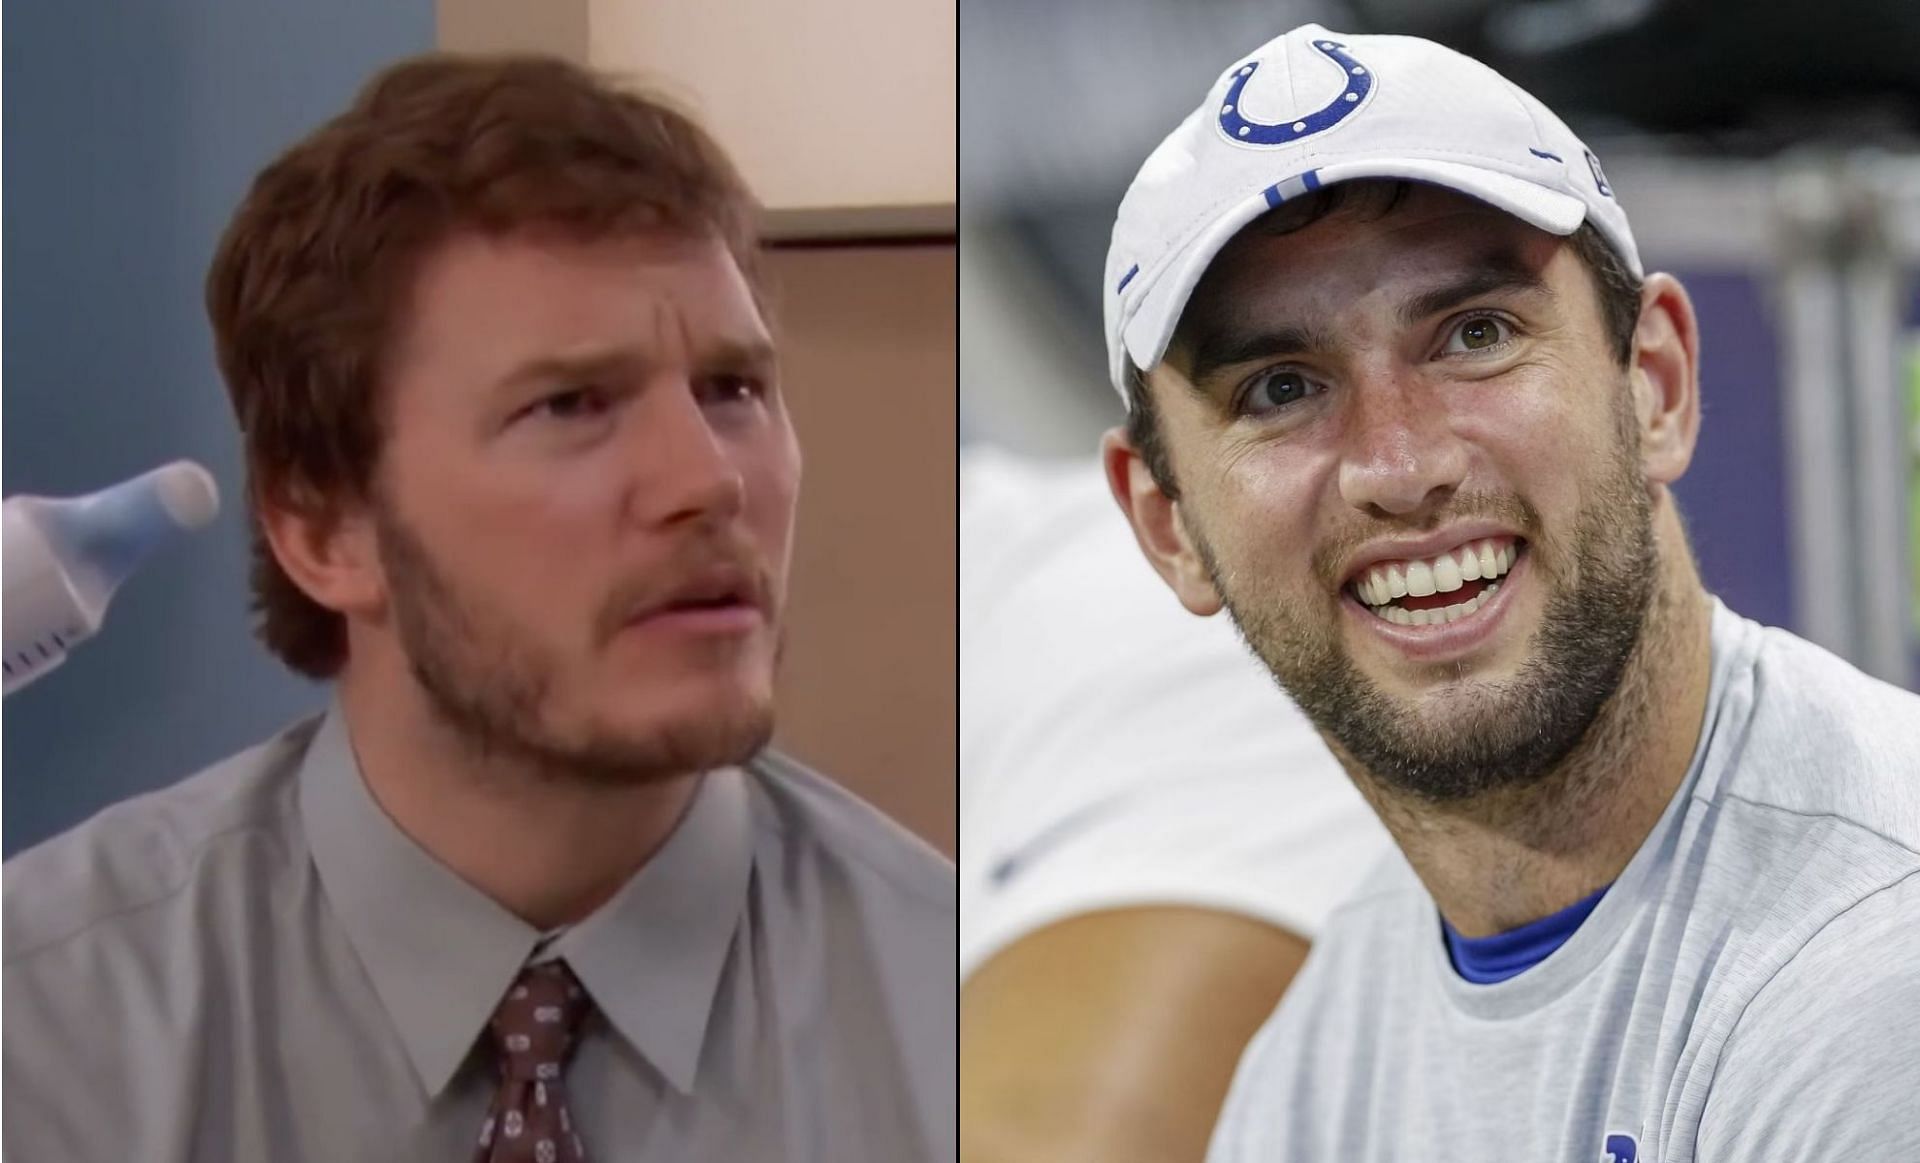 Michael Schur had nothing but kind words for Colts icon Andrew Luck